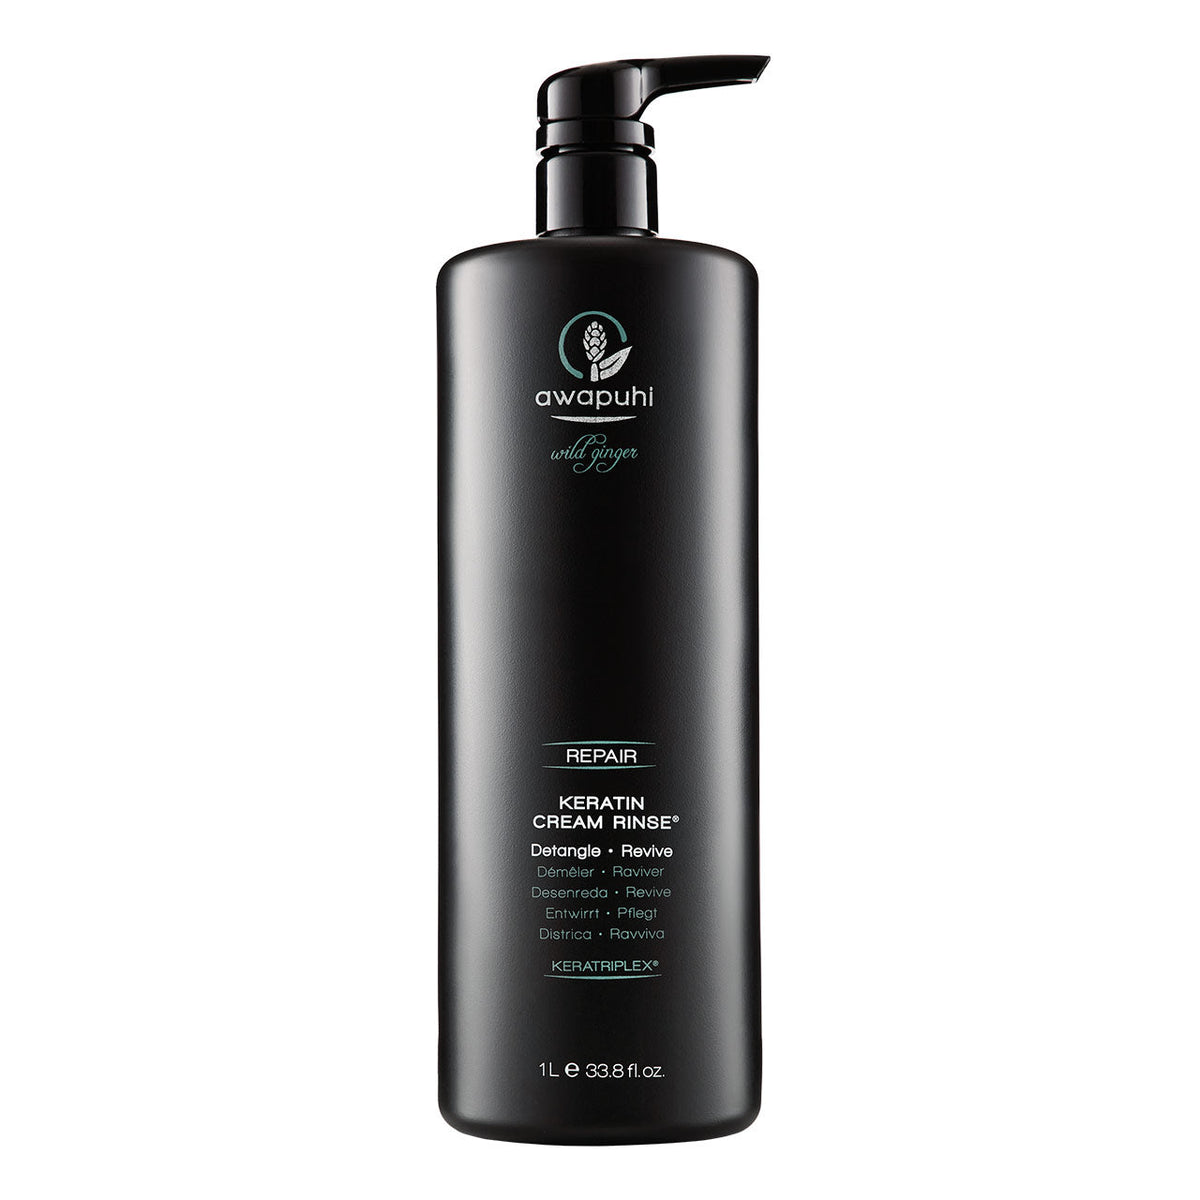 Awapuhi Wild Ginger Repair Keratin Cream Rinse - 1L - by Paul Mitchell |ProCare Outlet|